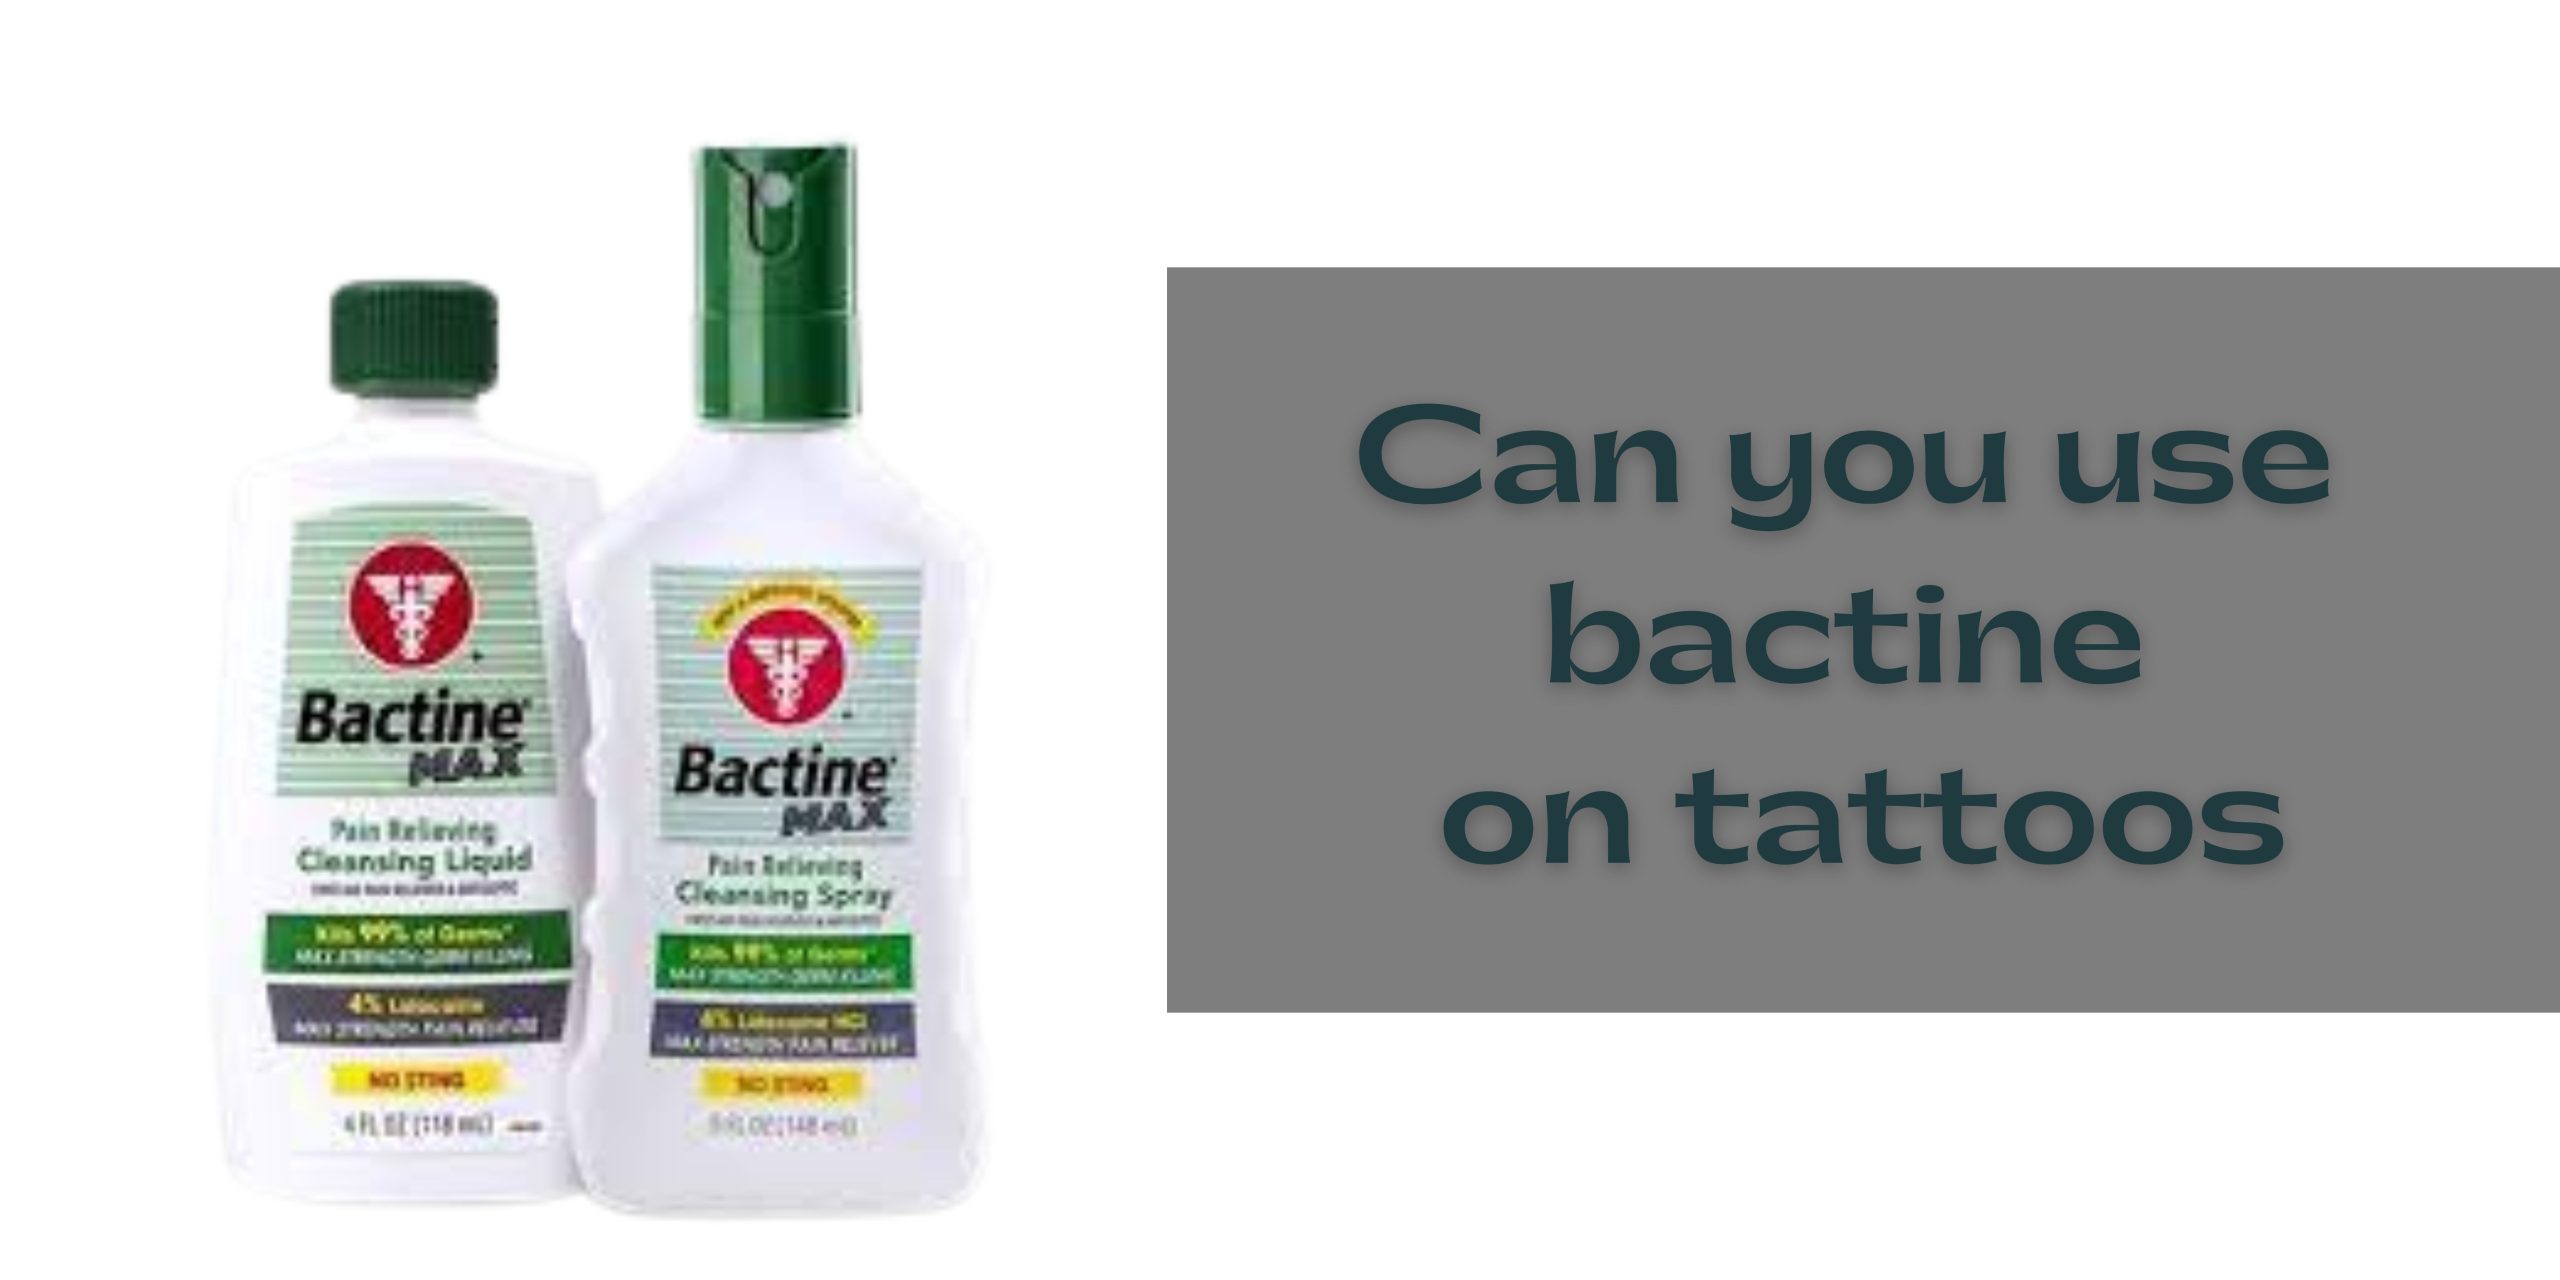 BACTINE MAX PAIN RELIEVING CLEANSING SPRAY  AFicionado Tattoo Supply Co  Ltd